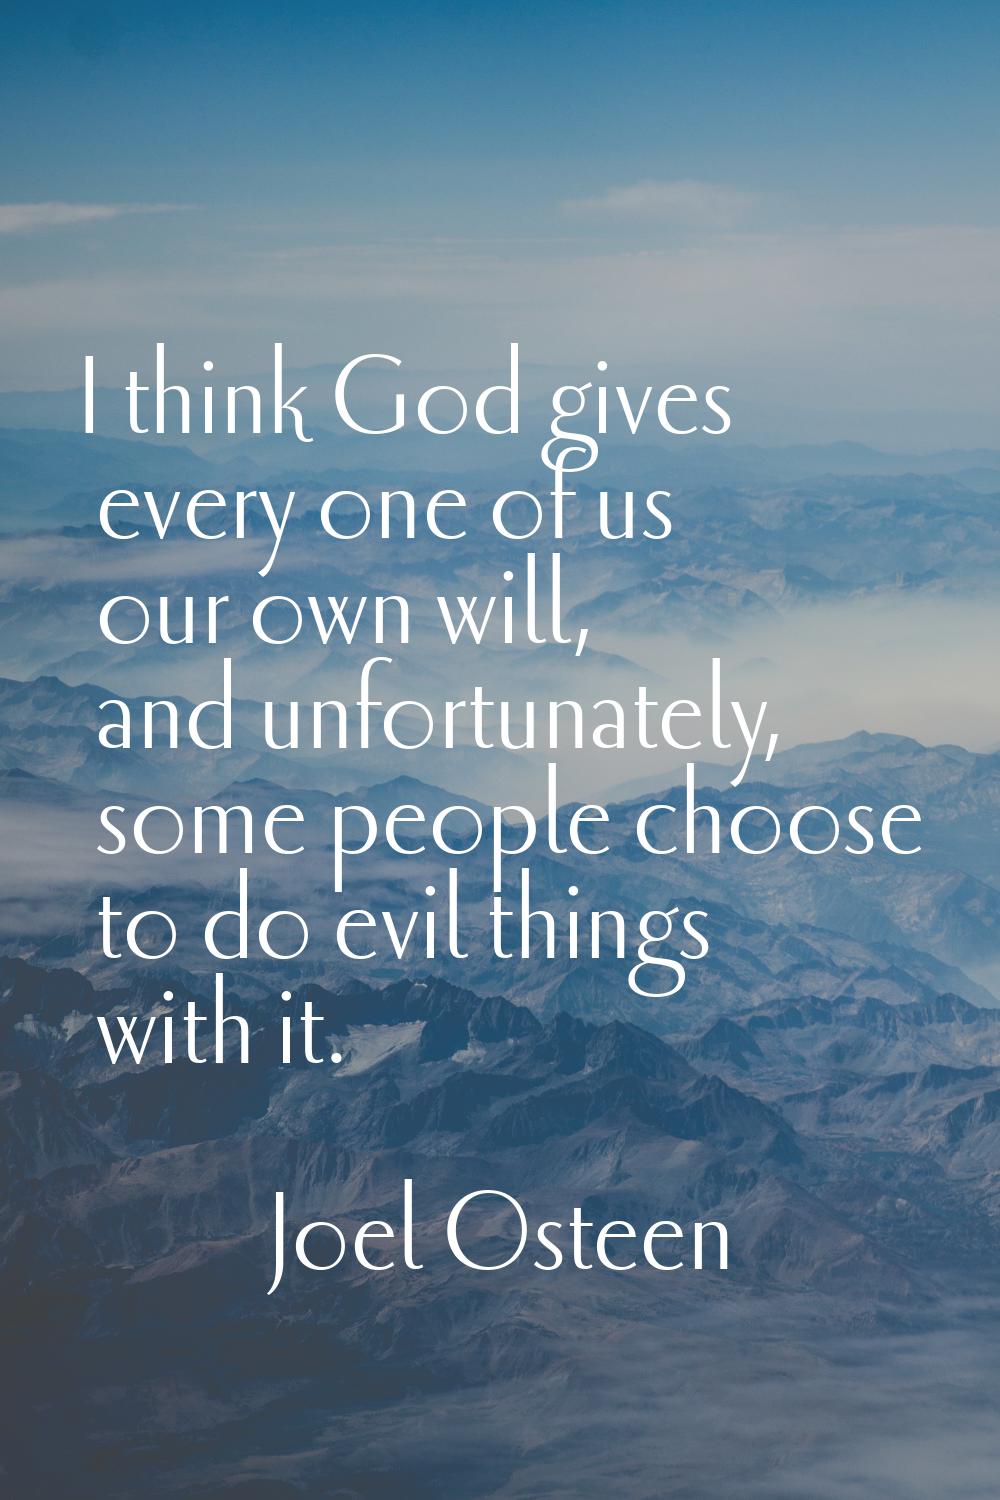 I think God gives every one of us our own will, and unfortunately, some people choose to do evil th